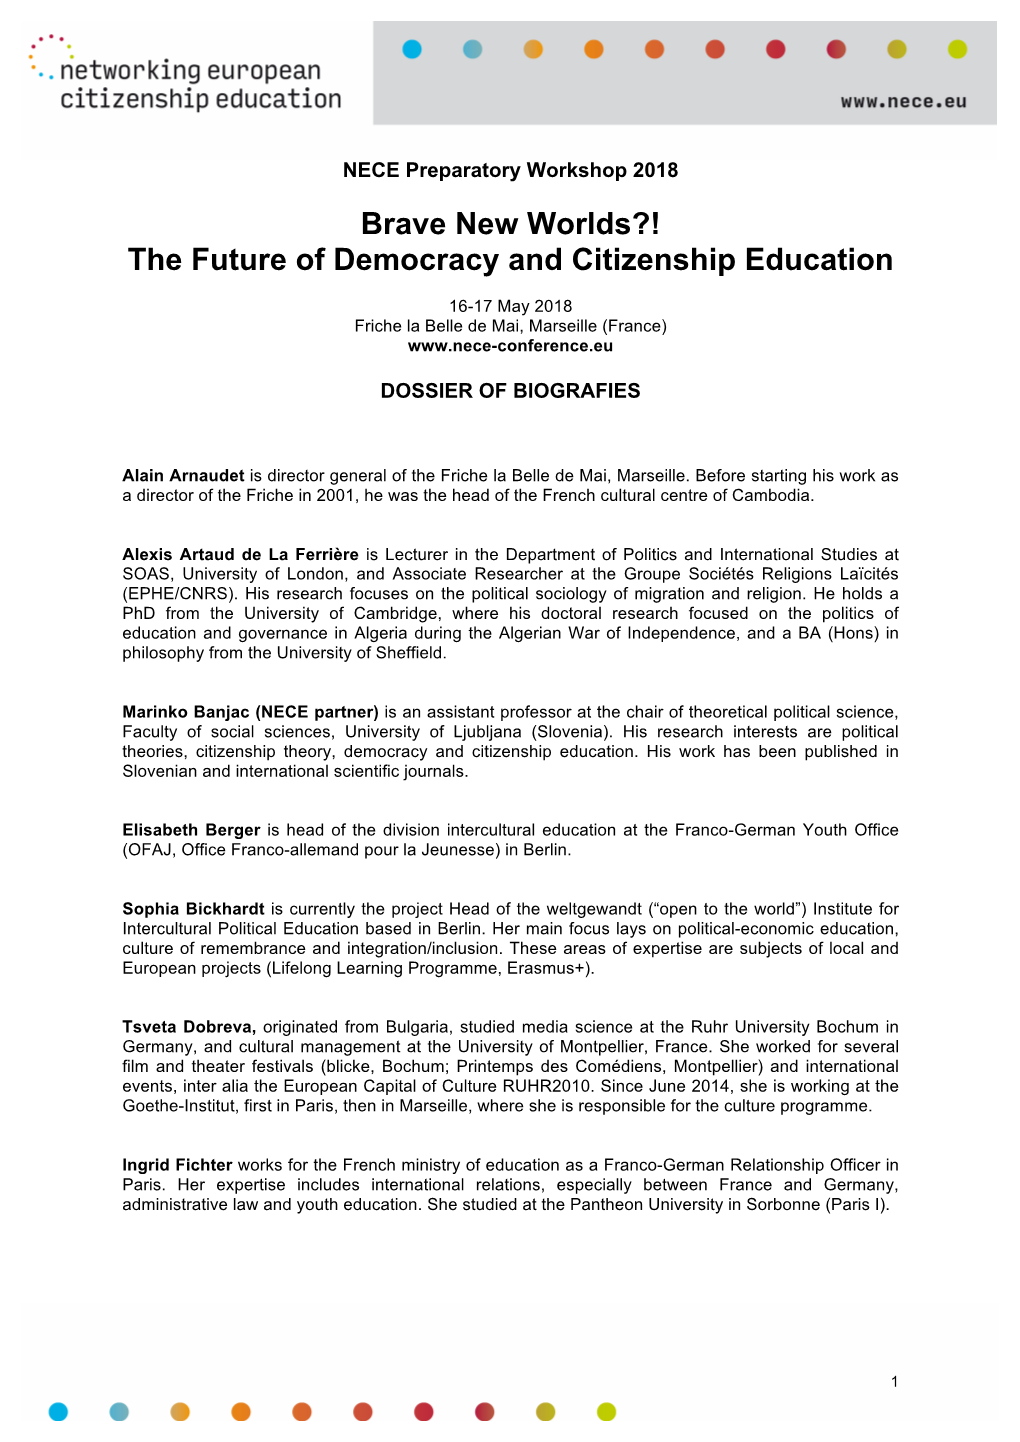 Brave New Worlds?! the Future of Democracy and Citizenship Education